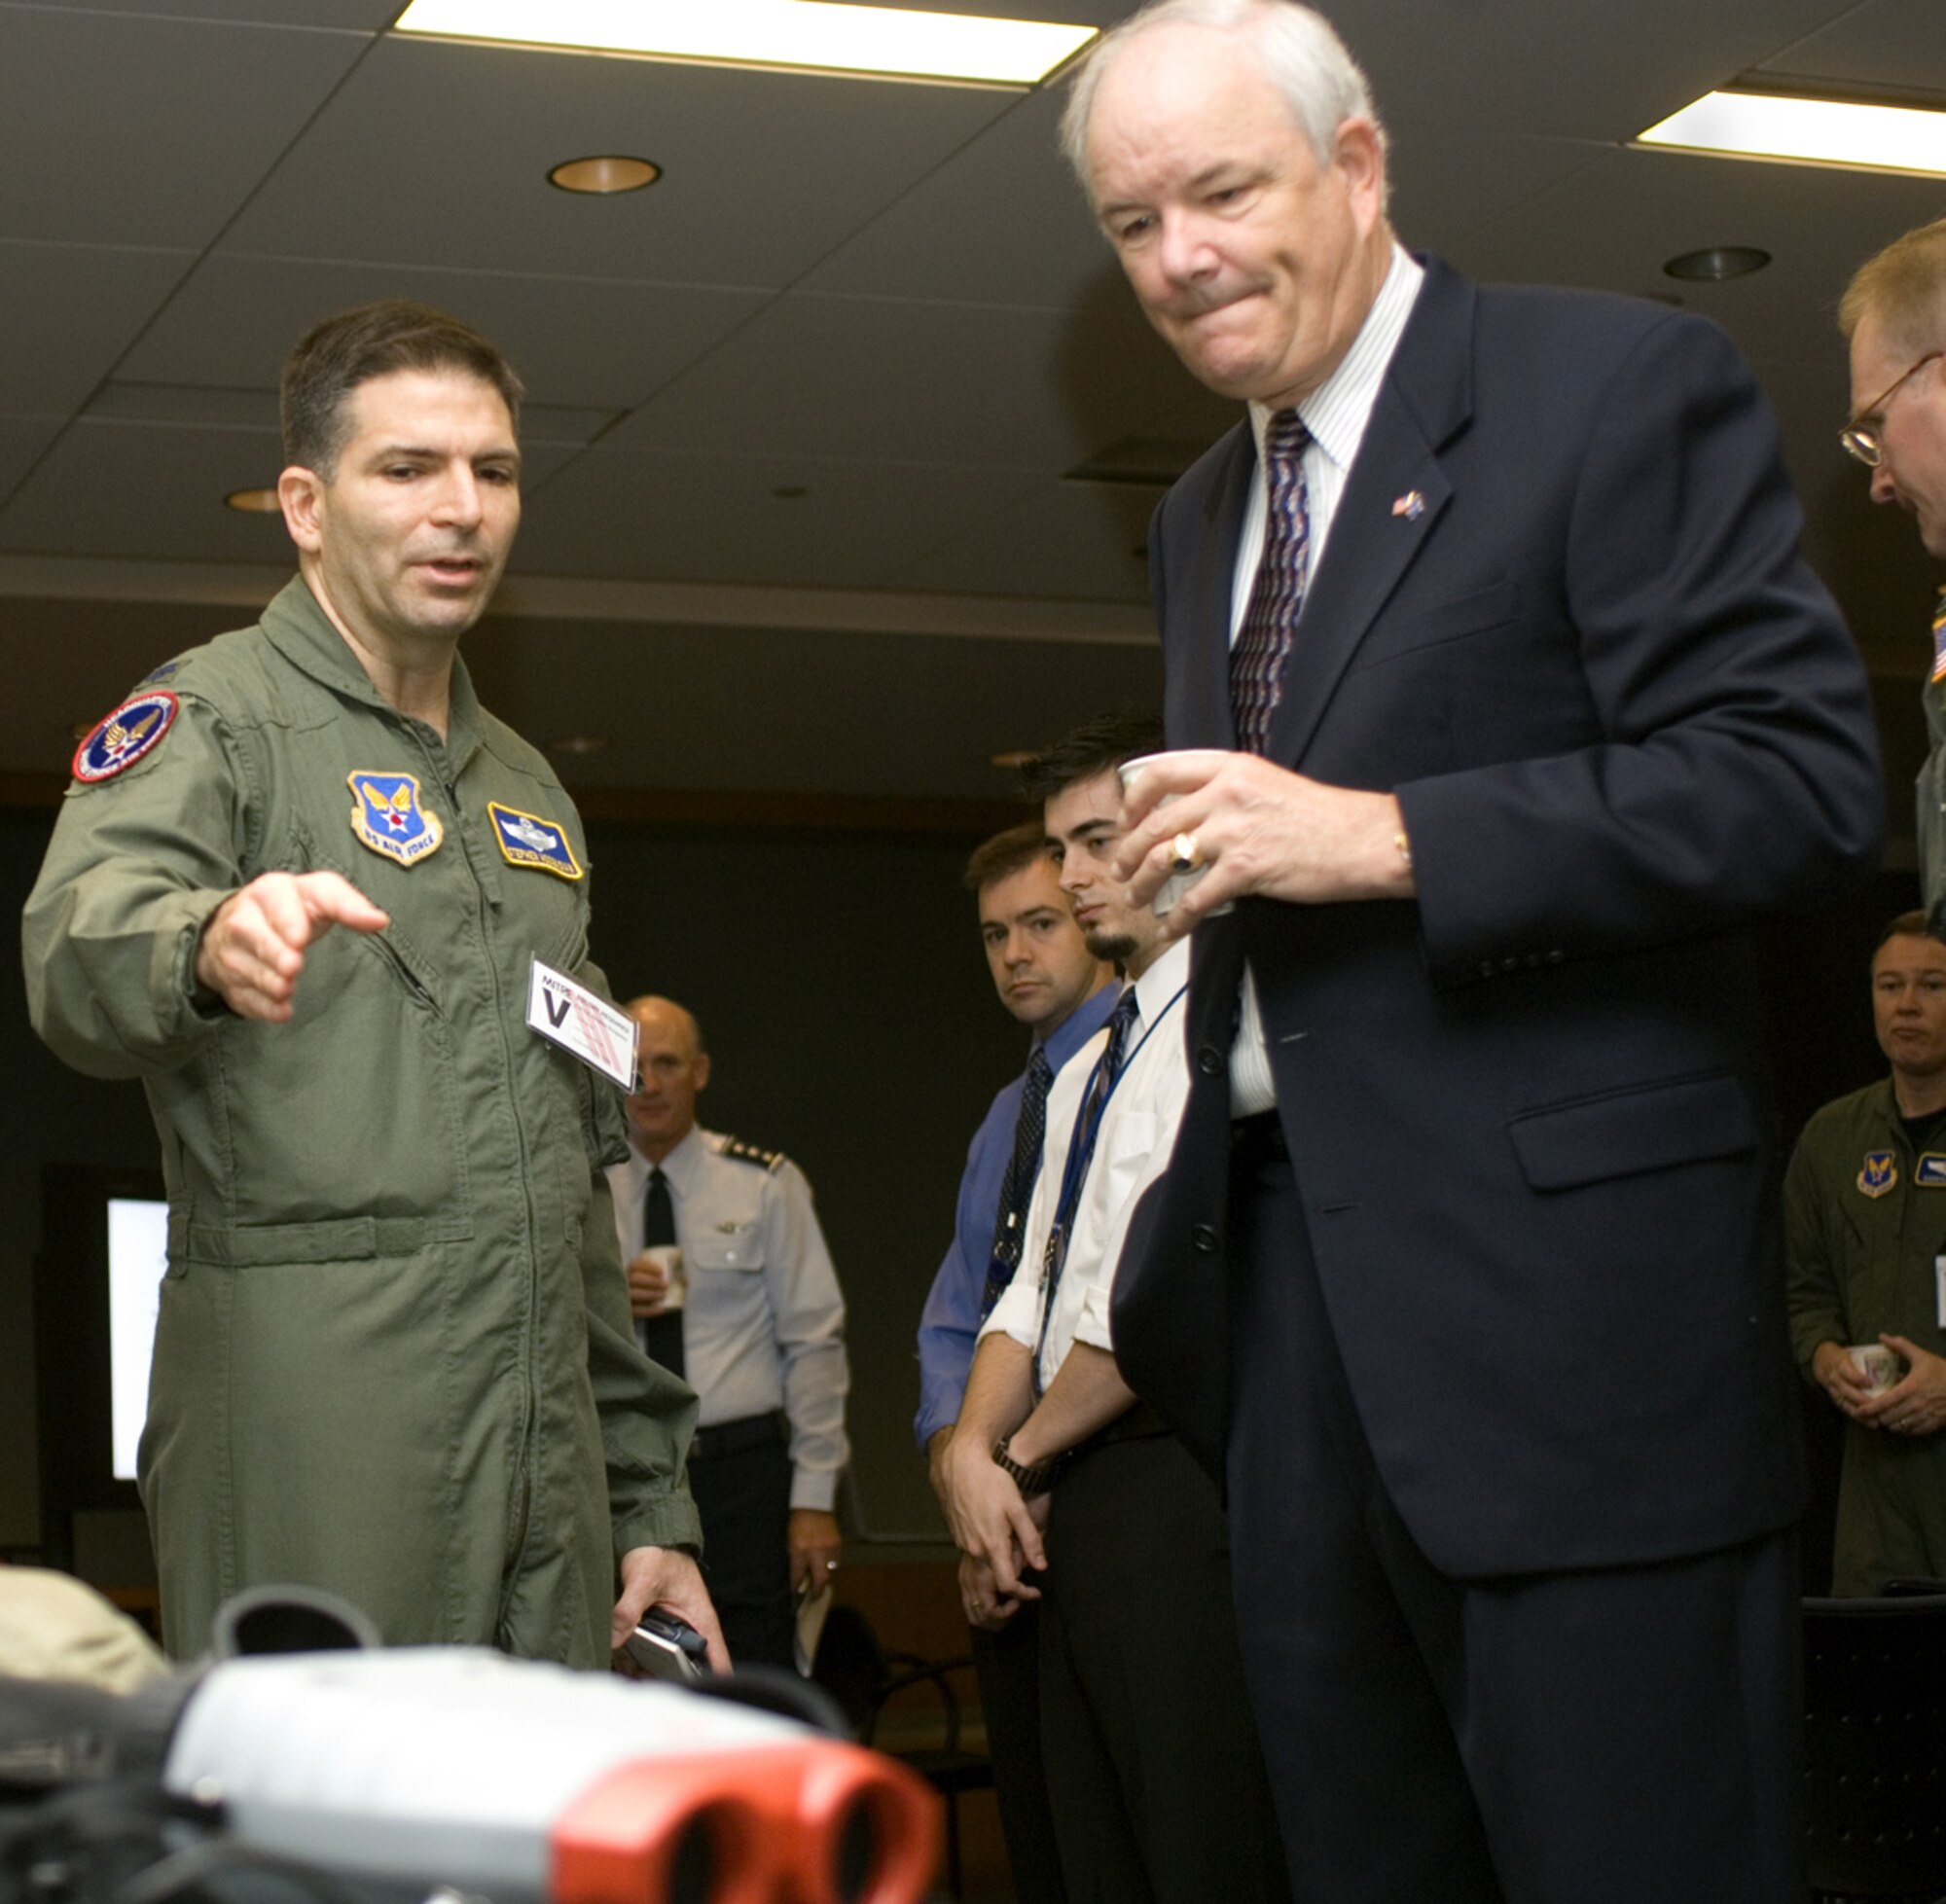 Lt. Col. Stephen Hoogasian, 64th Air Refueling Squadron commander, describes some of the technologies that can utilize Cursor on Target during a briefing held in September 2006 in Washington D.C. Those in attendence included distinguished guests such as Secretary of the Air Force  Michael Wynne.  (Courtesy Photo/Andy Clevenger)